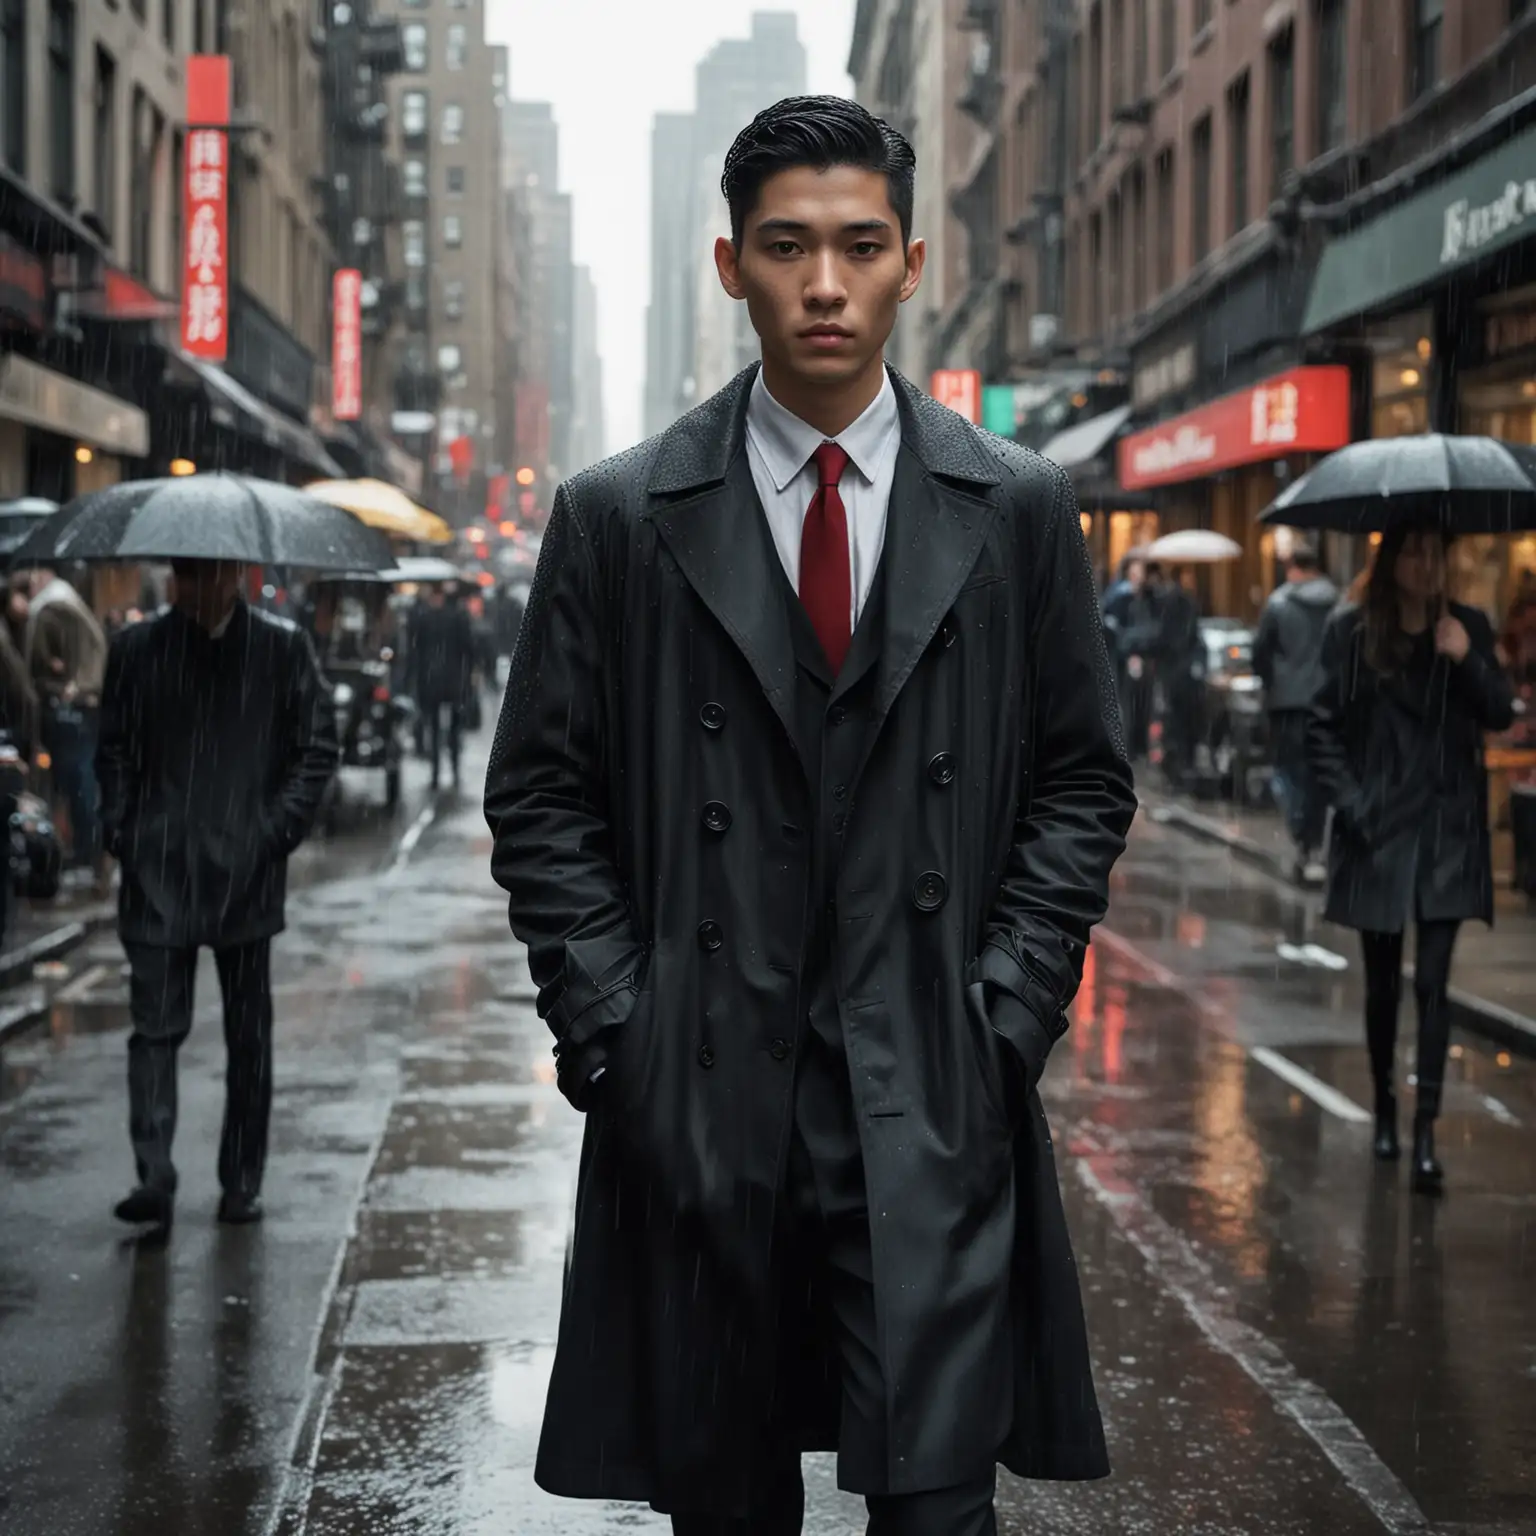 A portrait photograph capturing the essence of urban sophistication, inspired by the iconic style of Annie Leibovitz. In the midst of a rainy day, a young Asian man with sleek black hair styled in a fade haircut stands confidently in the middle of a bustling city street. He exudes a sense of refined elegance dressed in a tailored black coat, crisp white shirt, and a bold red tie. The raindrops cascade down his coat, adding a dynamic element to the scene as he gazes directly at the camera with an enigmatic expression, embodying a modern interpretation of timeless style amidst the urban chaos.